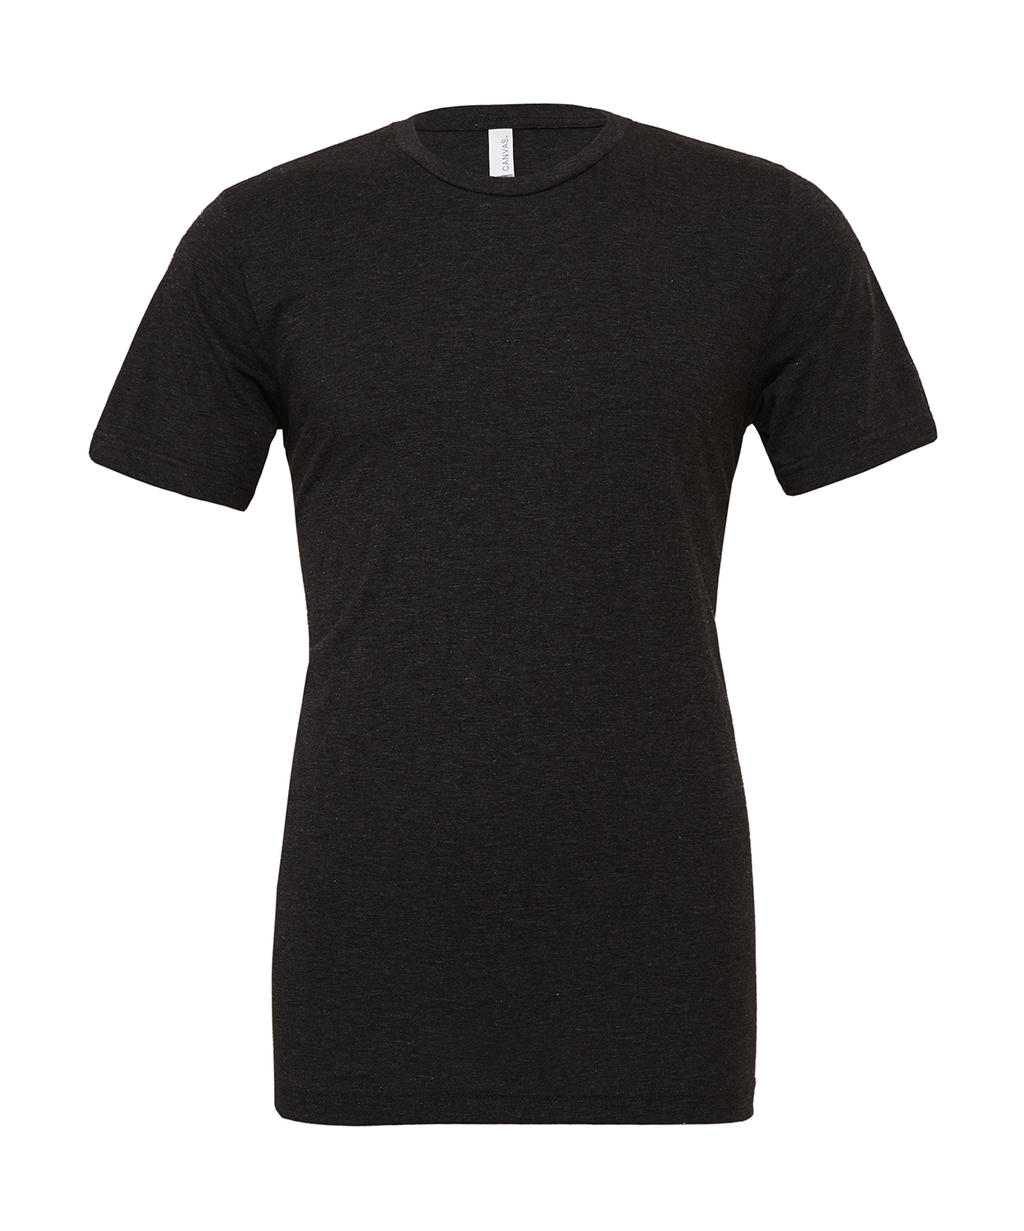  Unisex Triblend Short Sleeve Tee in Farbe Charcoal-Black Triblend